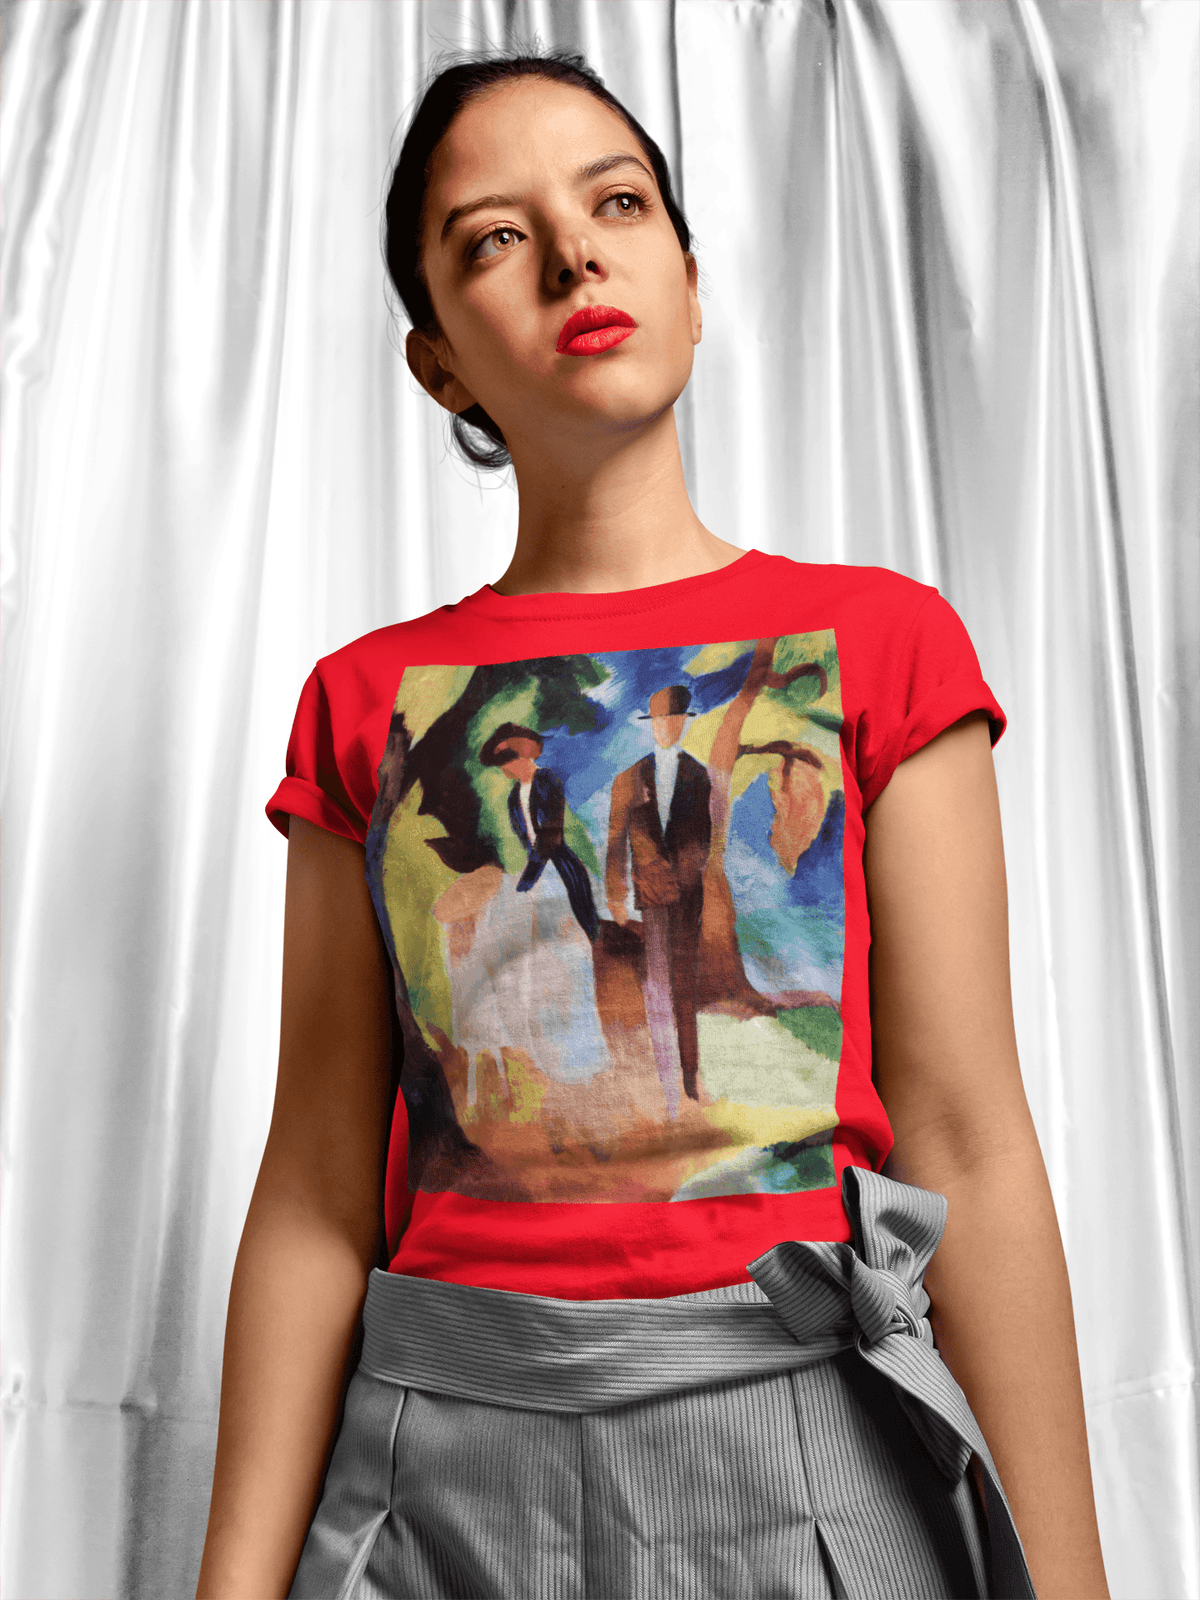 August Macke's People by a Blue Lake T-shirt-Regular Fit Tee-StylinArts